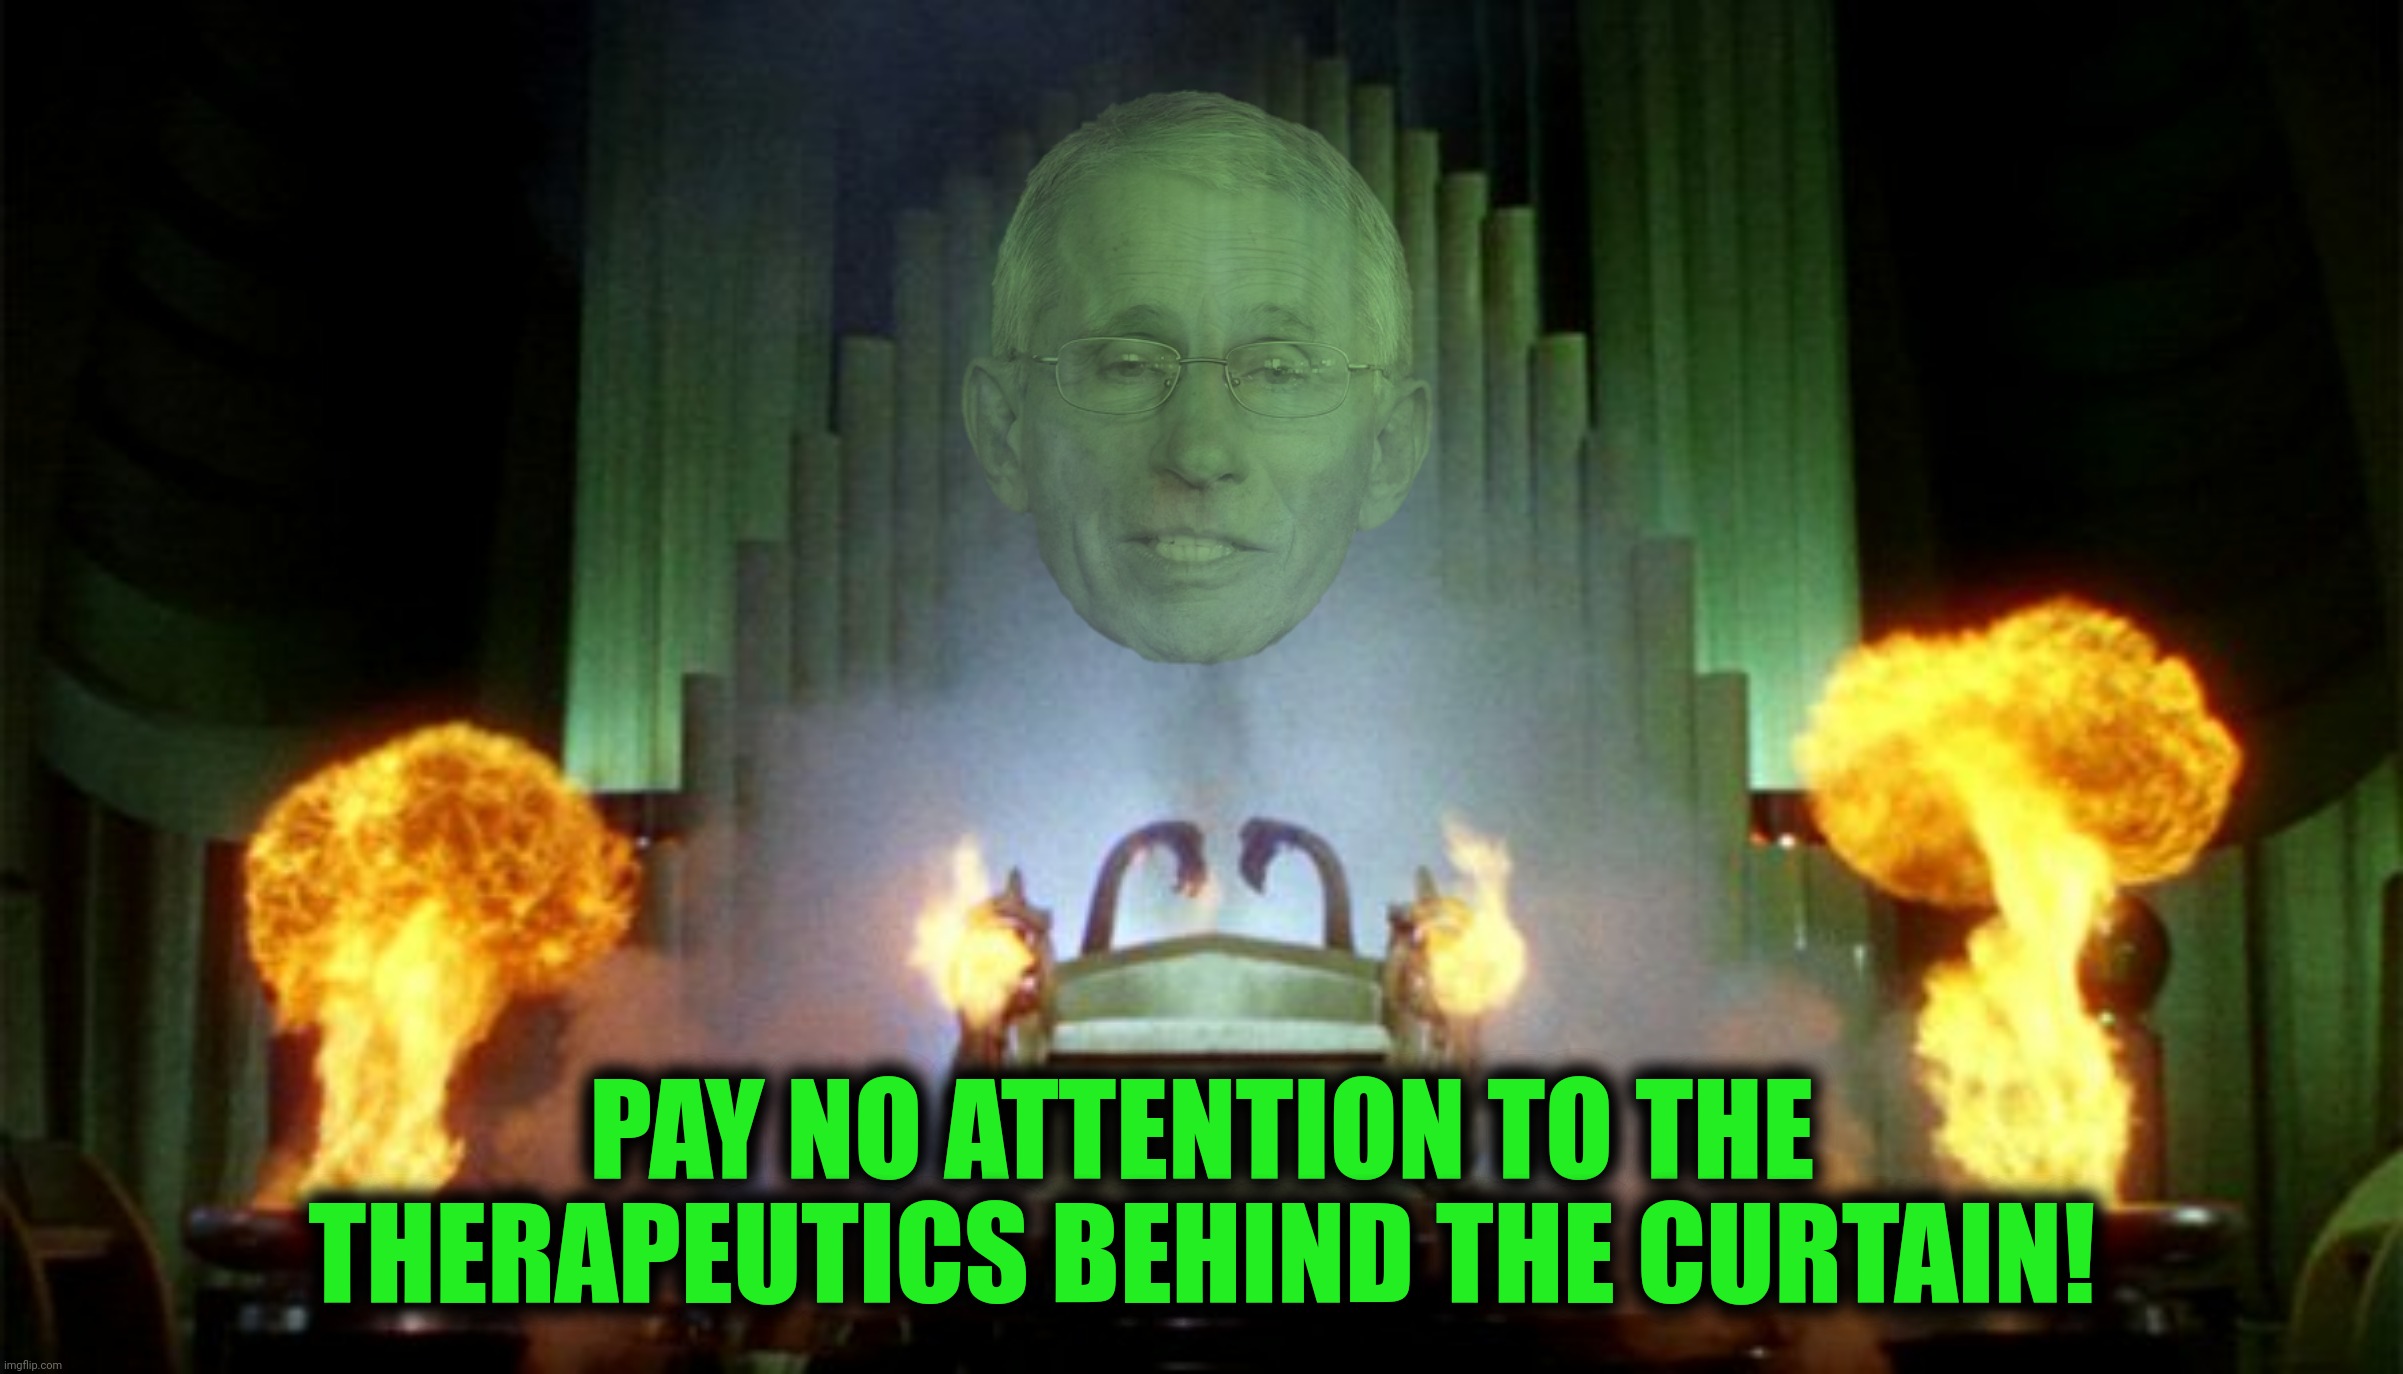 PAY NO ATTENTION TO THE THERAPEUTICS BEHIND THE CURTAIN! | made w/ Imgflip meme maker